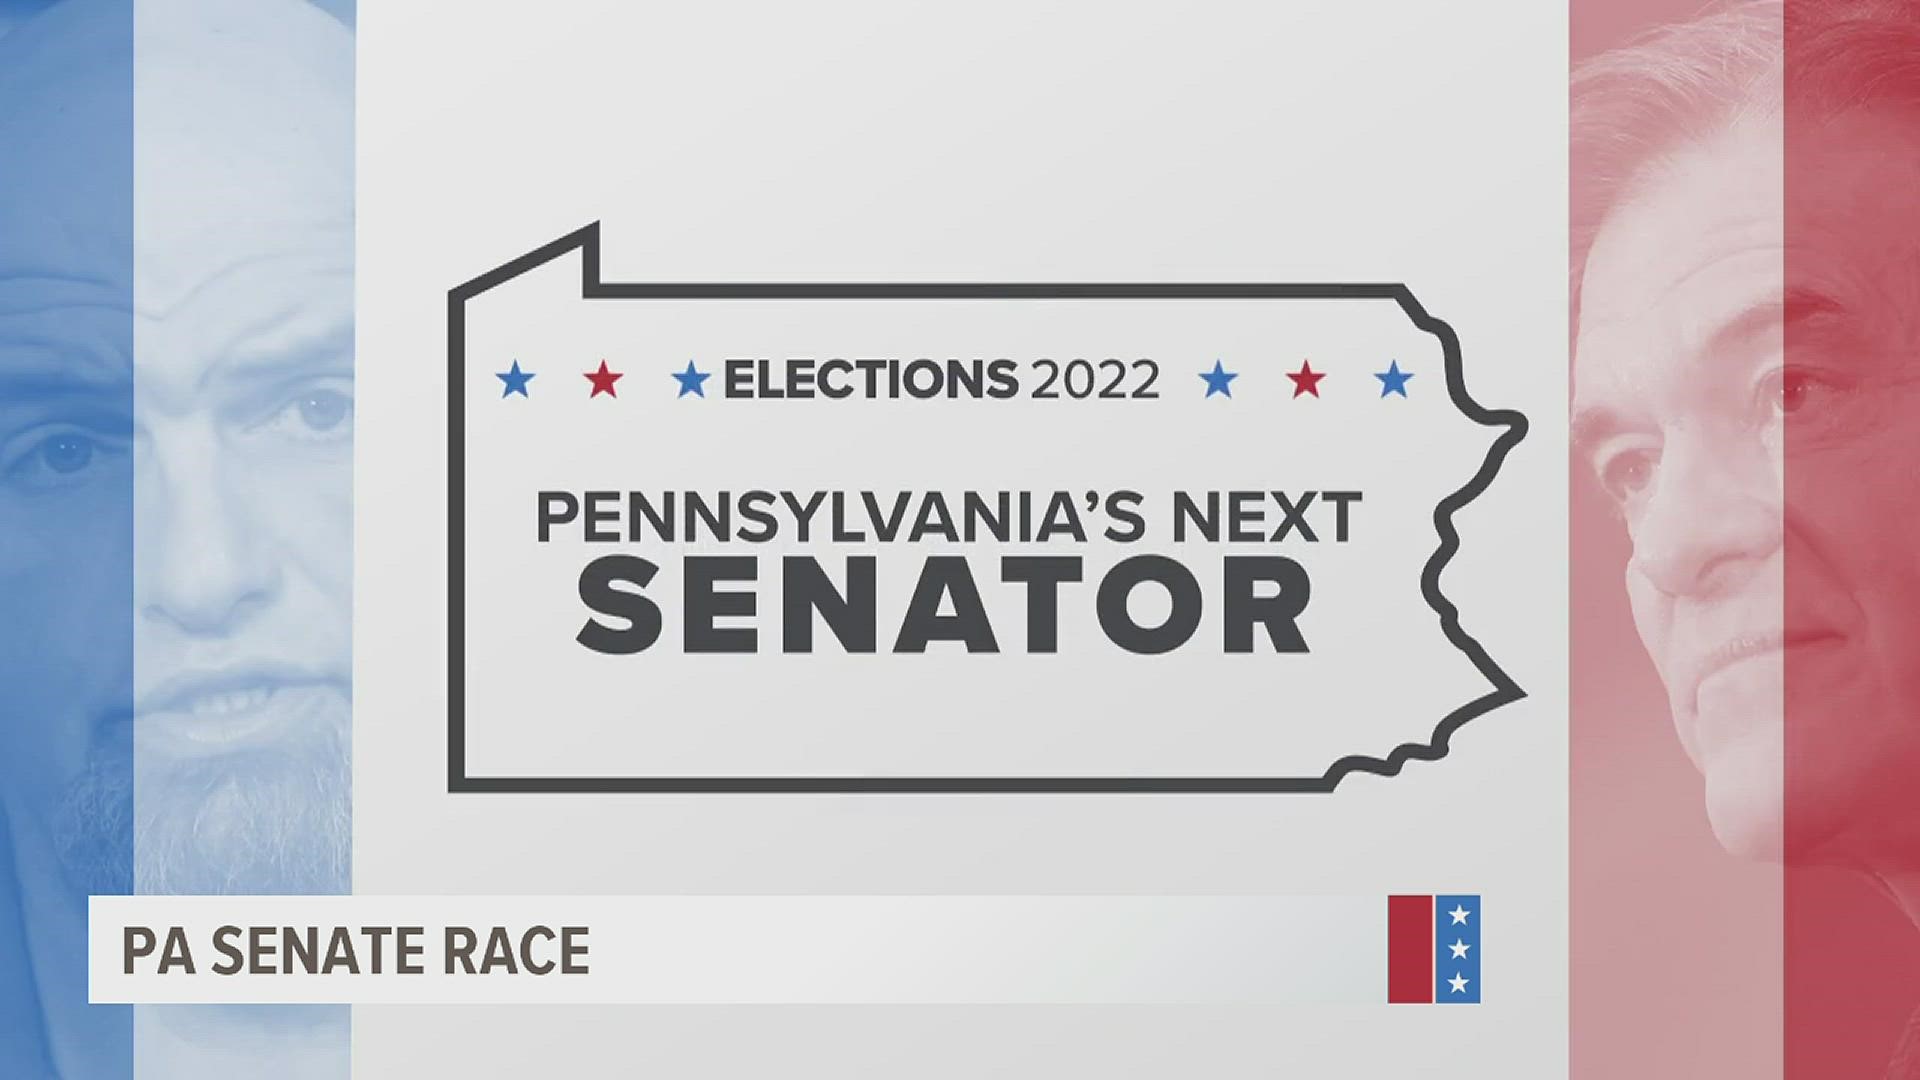 Here’s what you need to know about Pennsylvania's elections on Oct. 13.